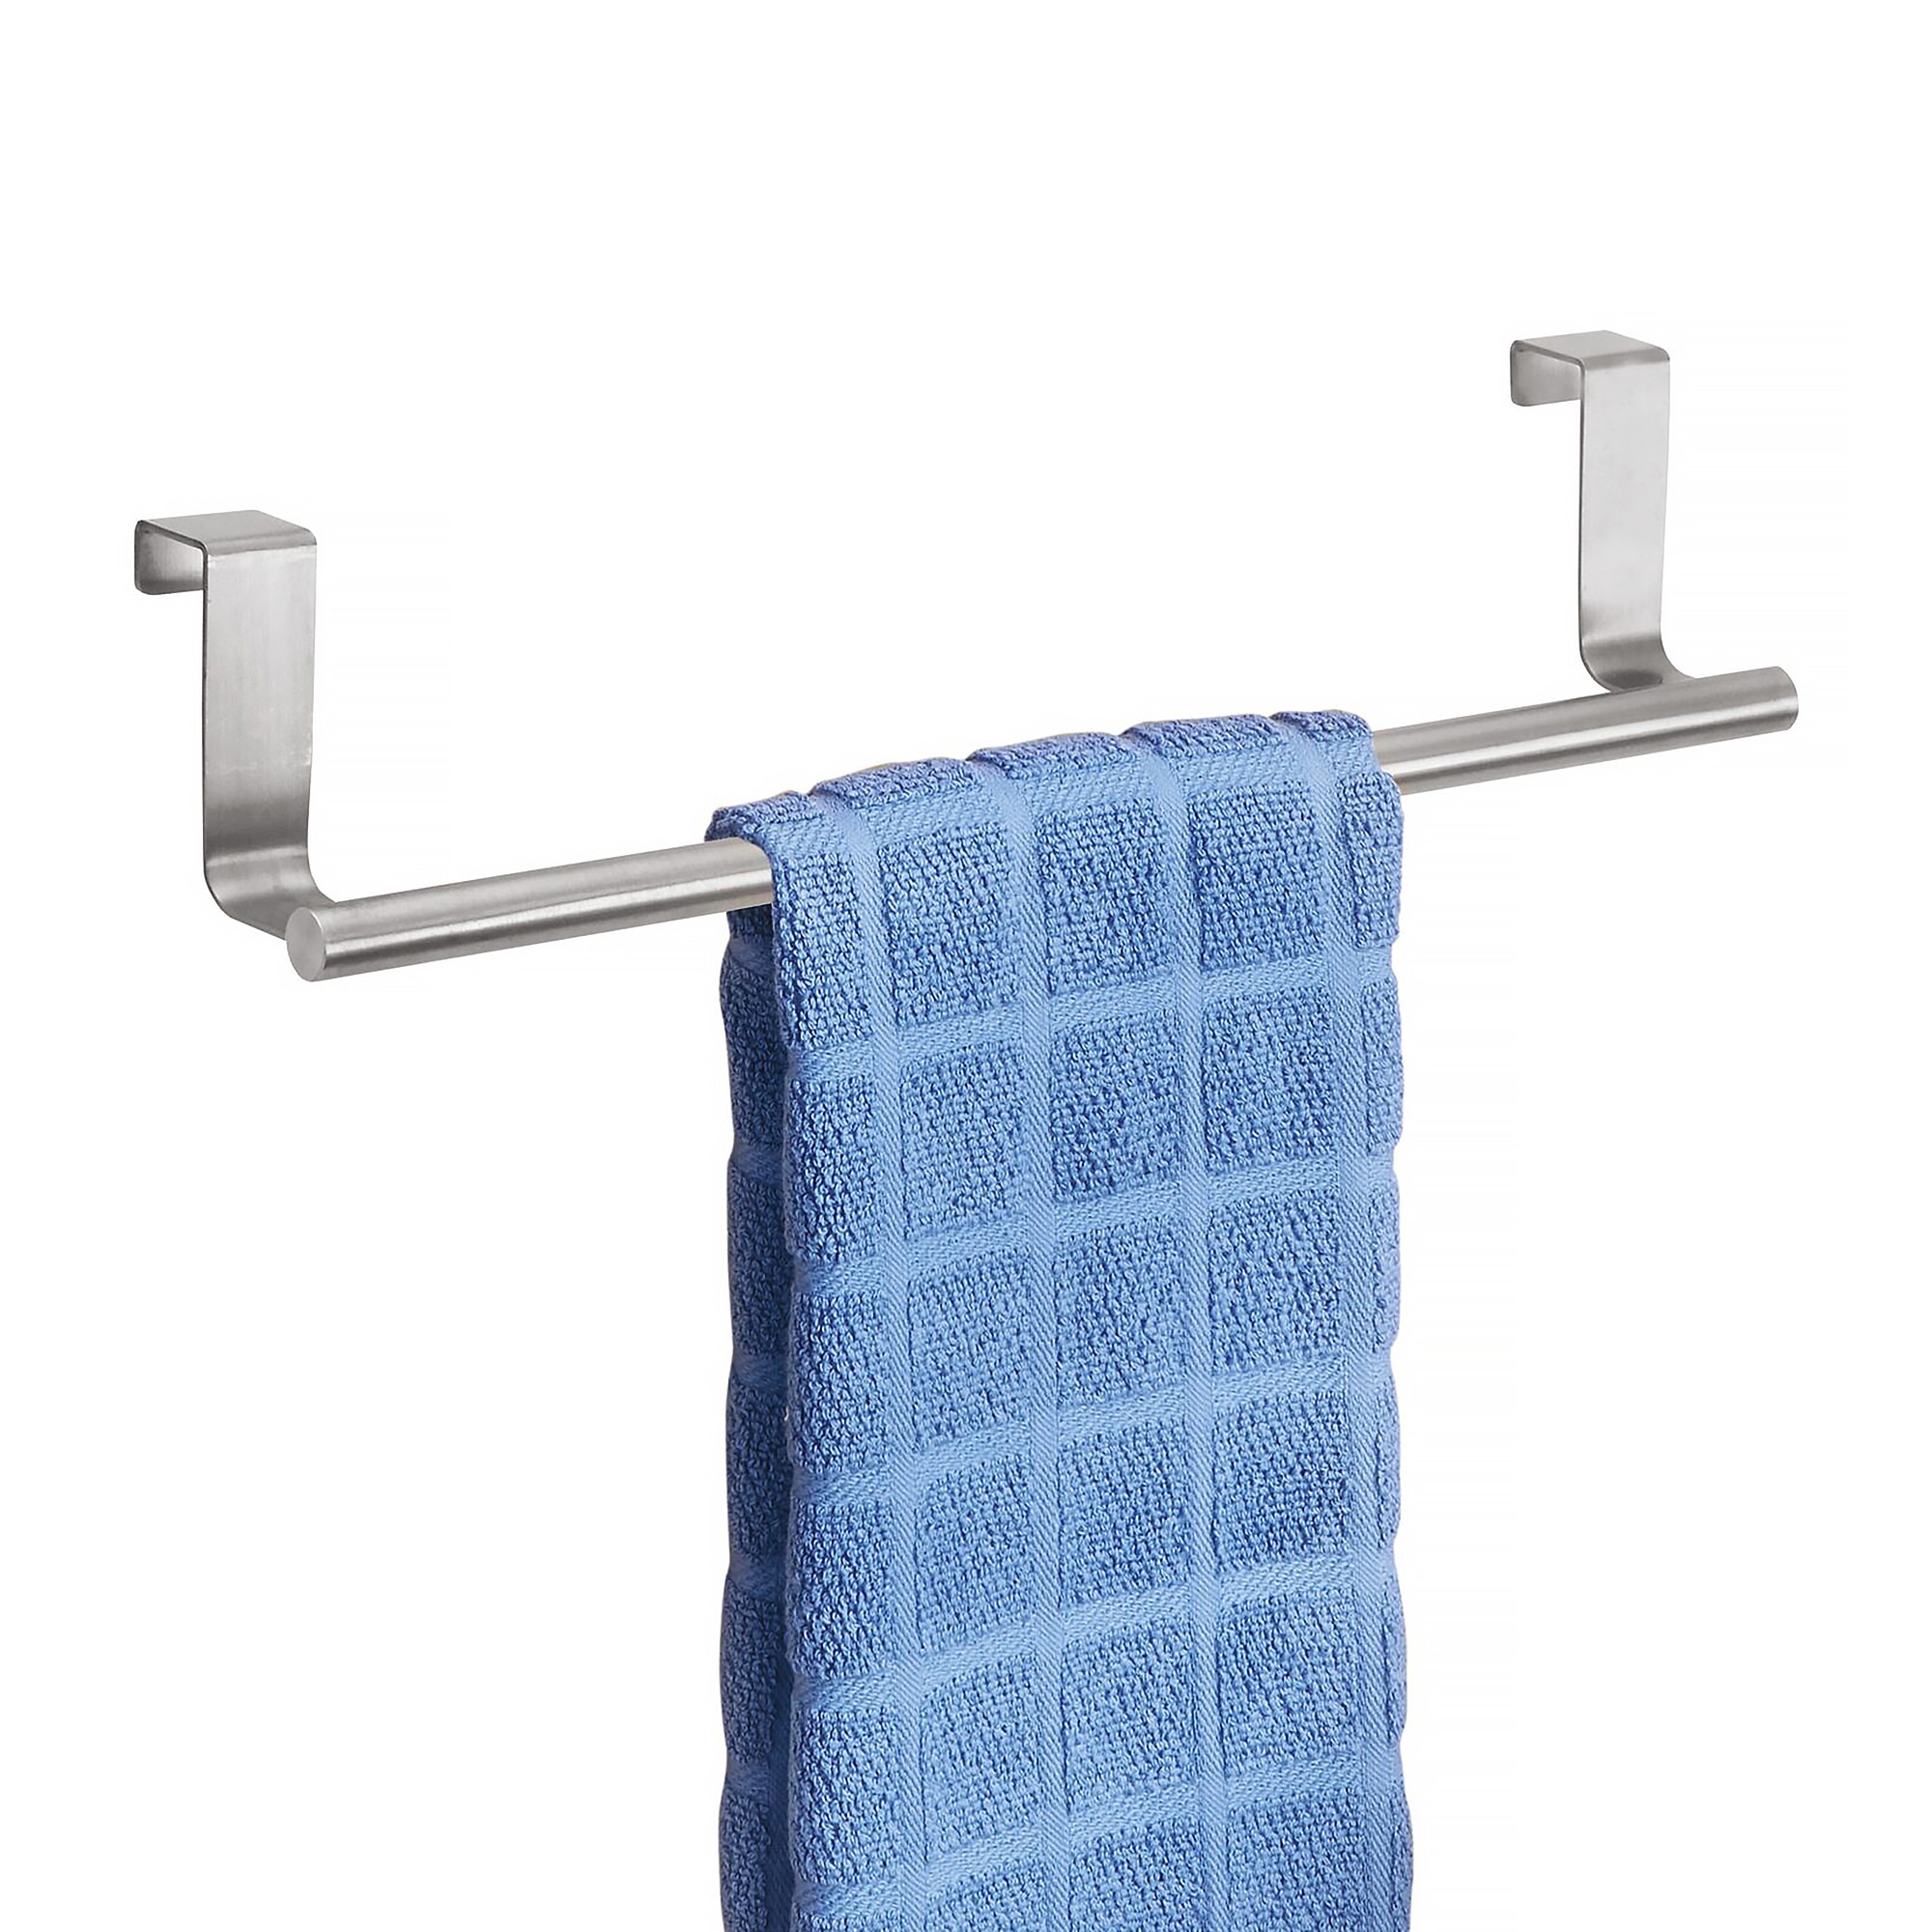 iDesign Forma Over The Cabinet Towel Bar 36x6cm Steel Image 2